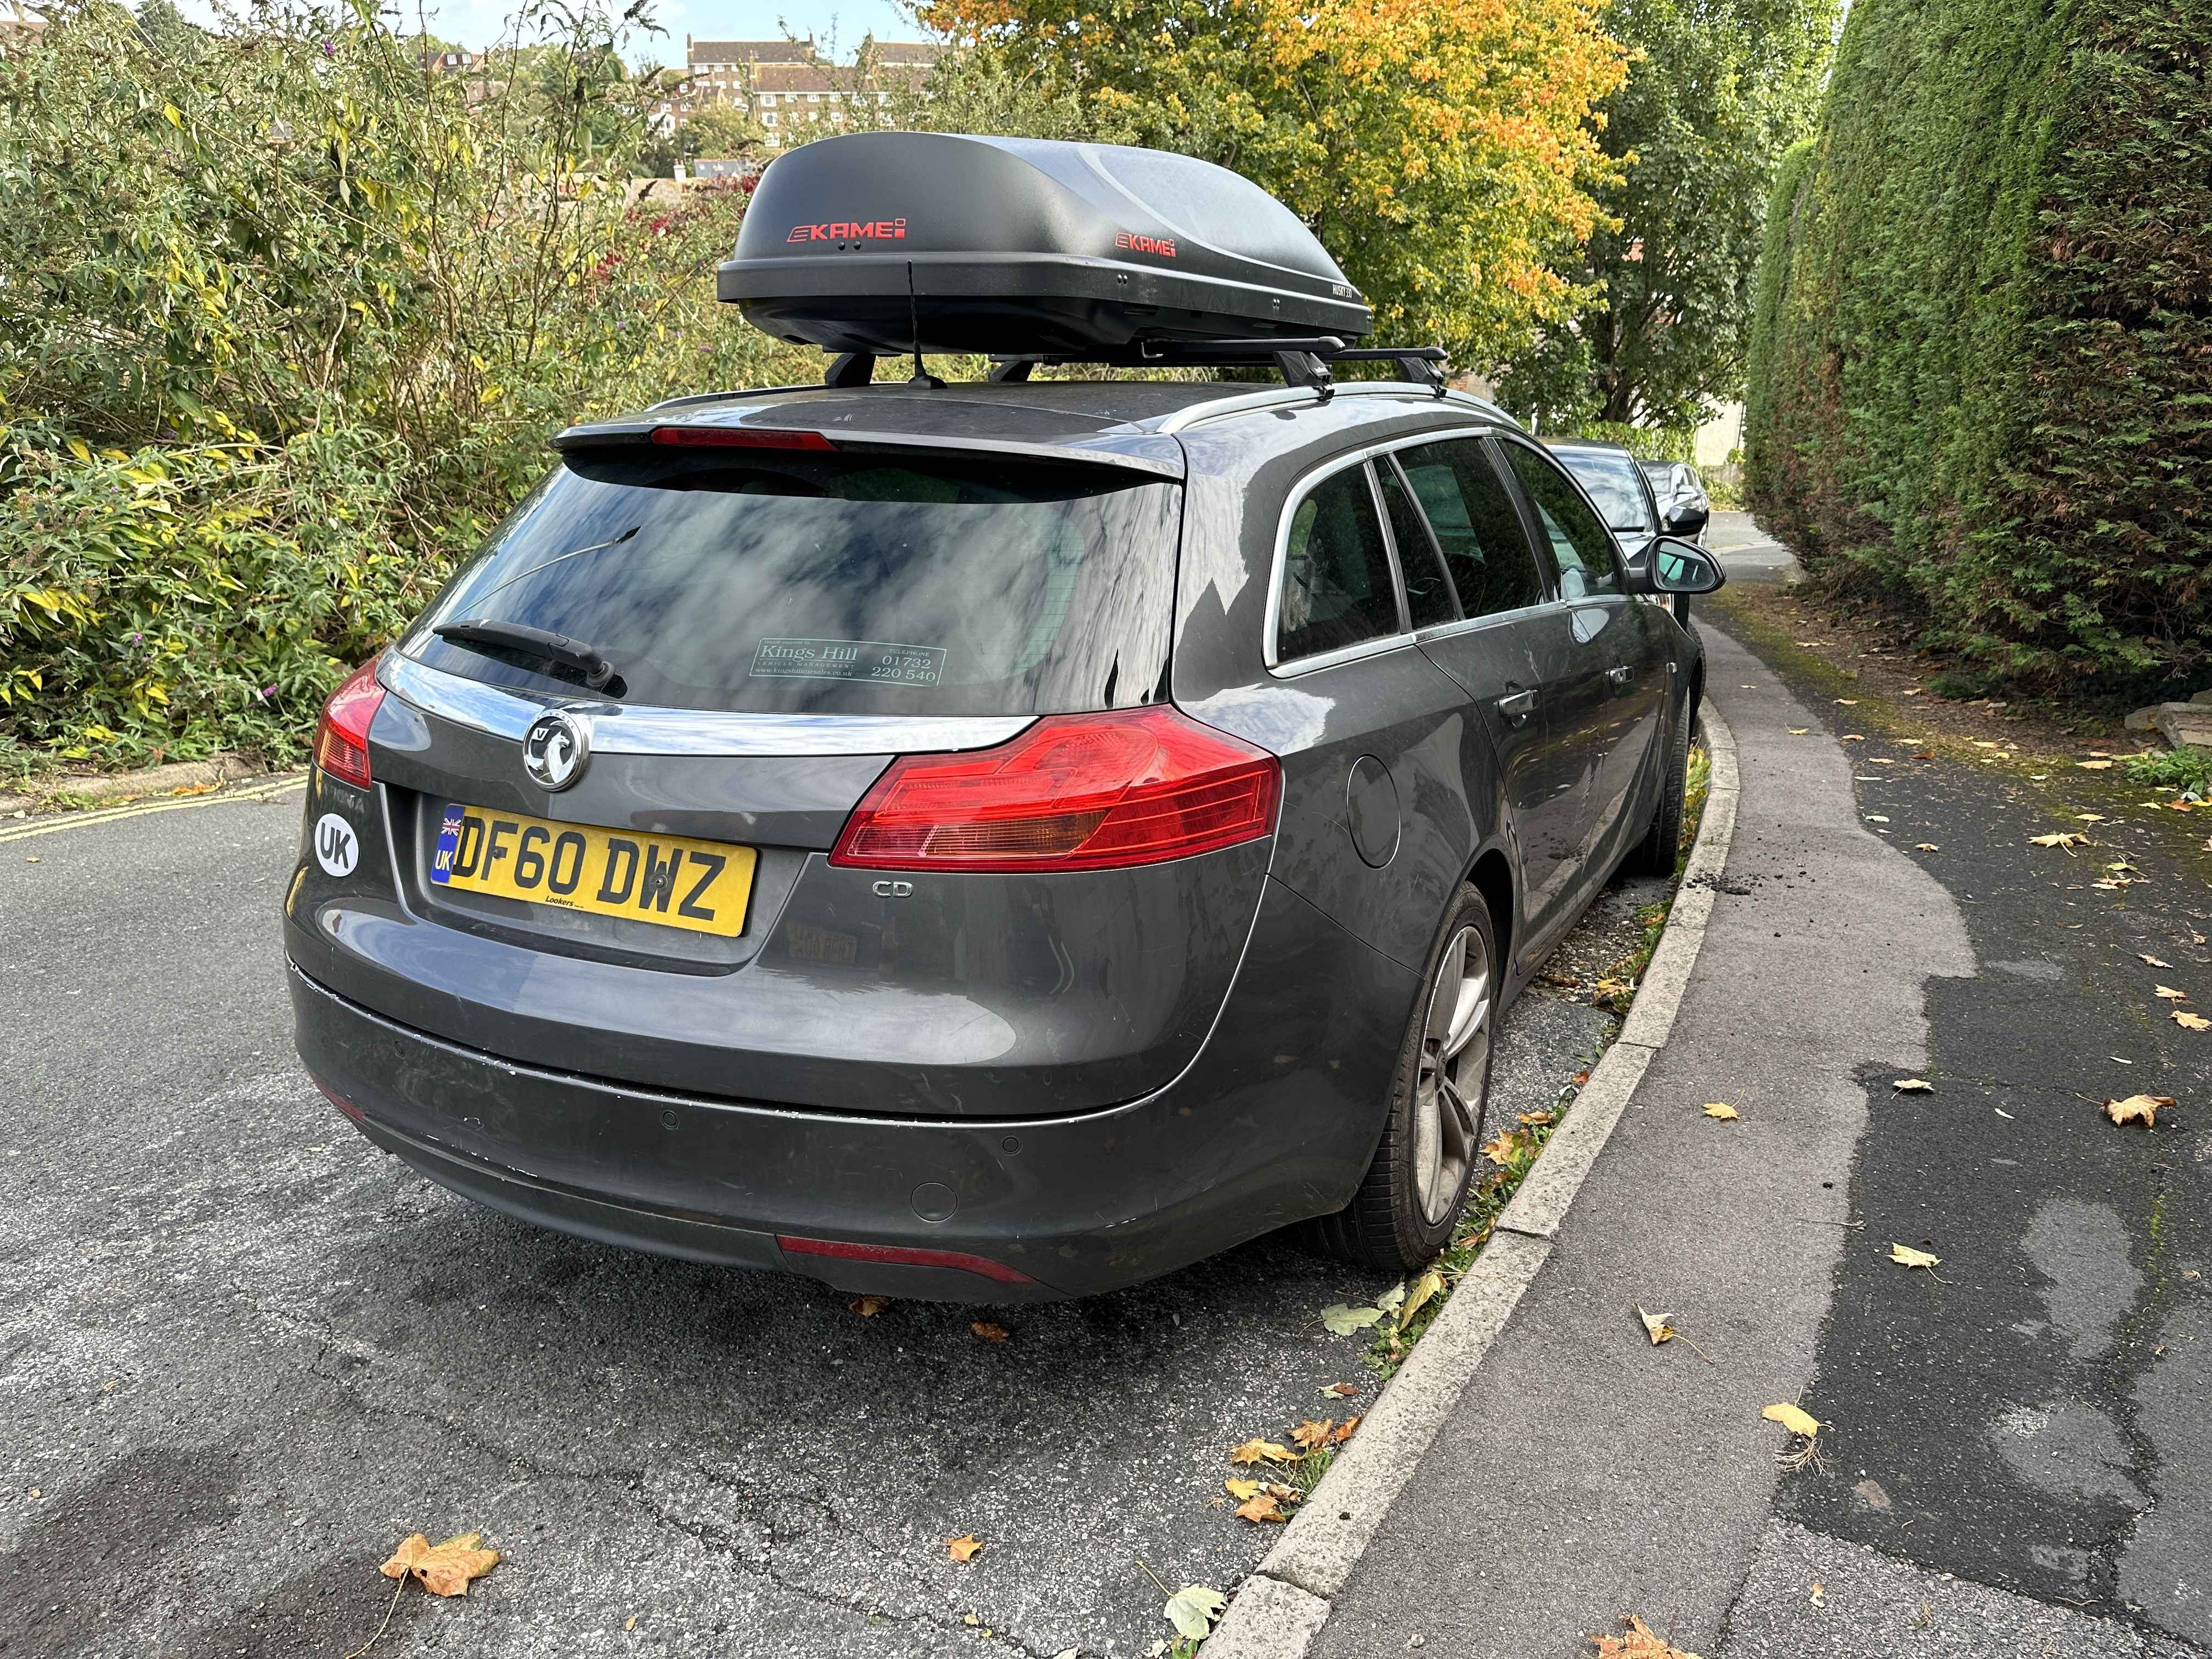 Photograph of DF60 DWZ - a Grey Vauxhall Insignia parked in Hollingdean by a non-resident. The second of nine photographs supplied by the residents of Hollingdean.